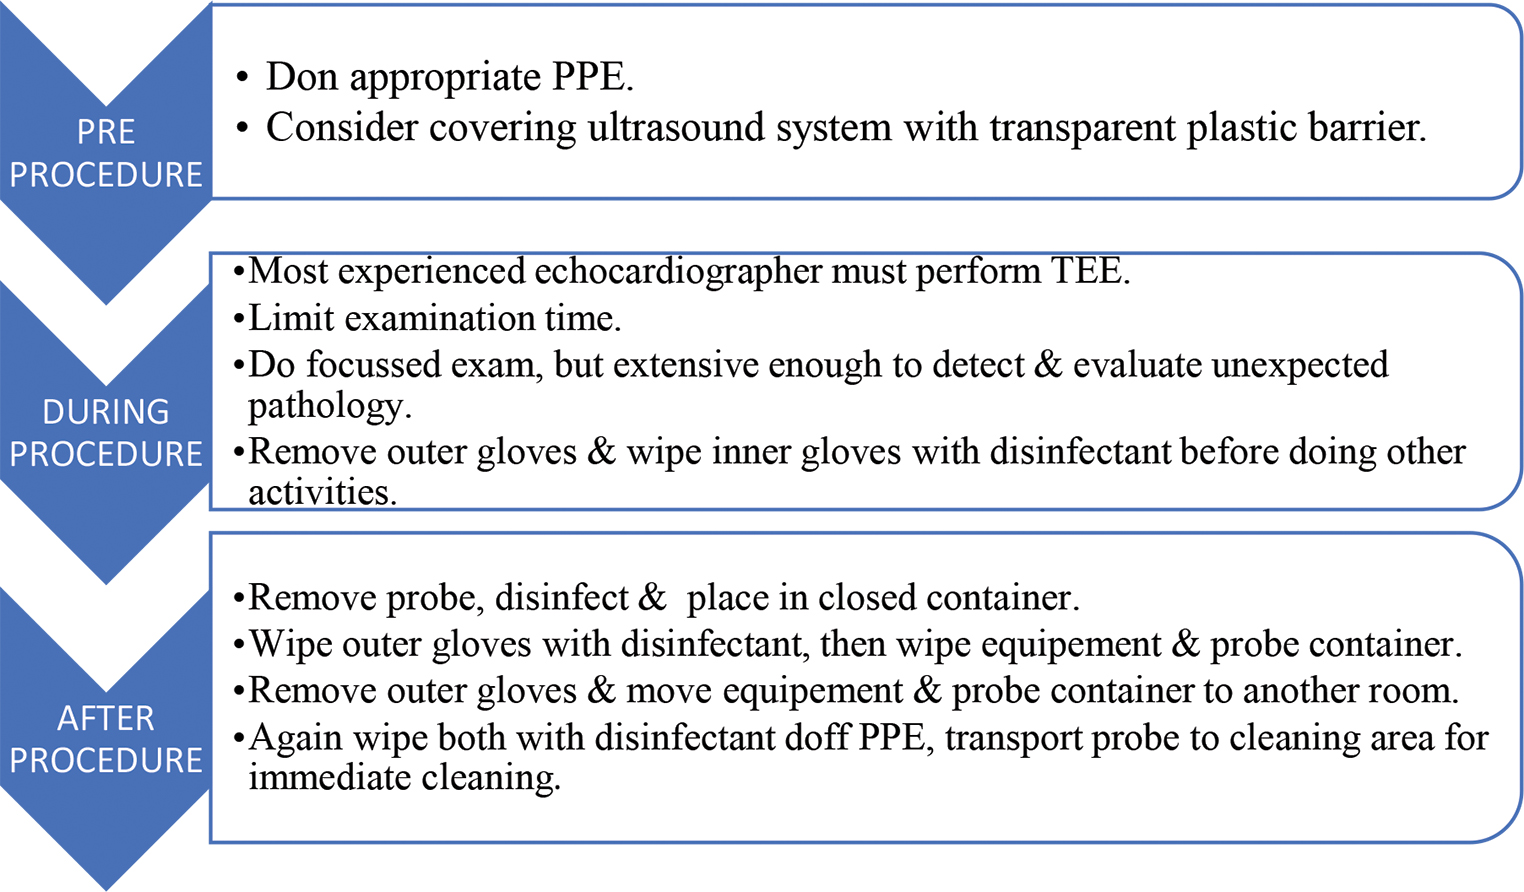 Stepwise approach to perform transesophageal echocardiography (TEE) as suggested by American Society of Echocardiography. PPE, personal protective equipment.